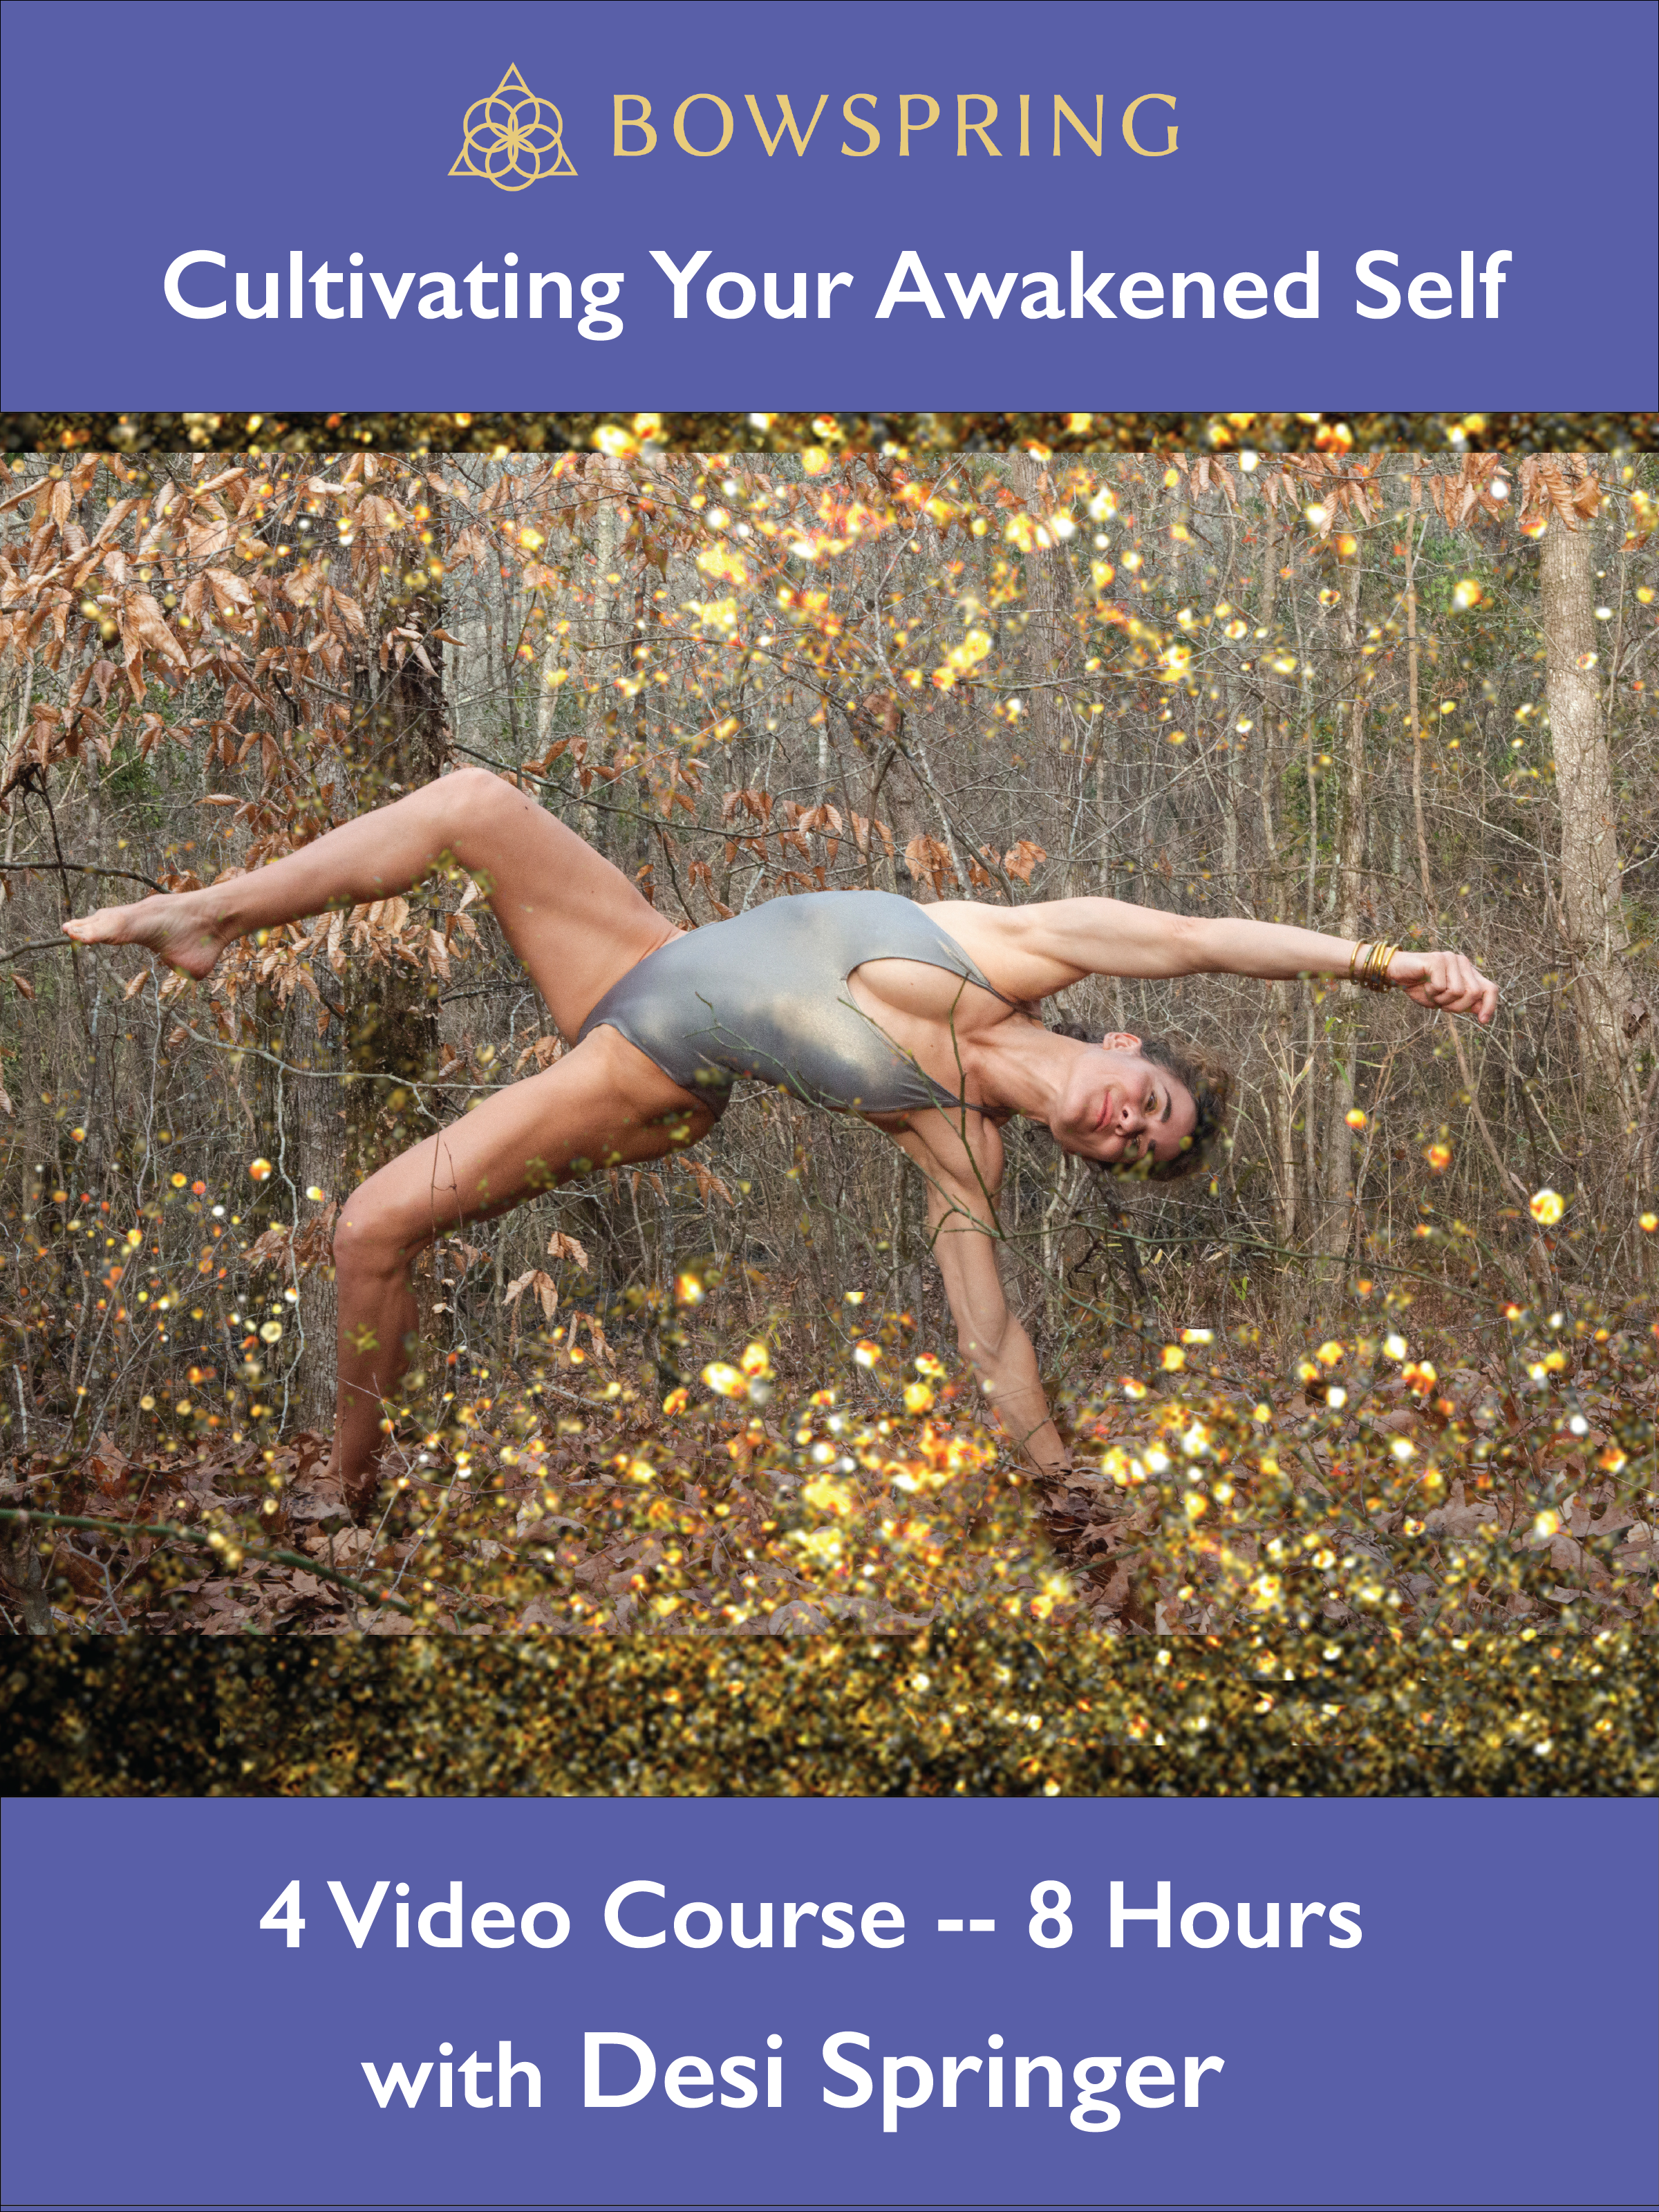 Cultivating Your Awakened Self with the Bowspring